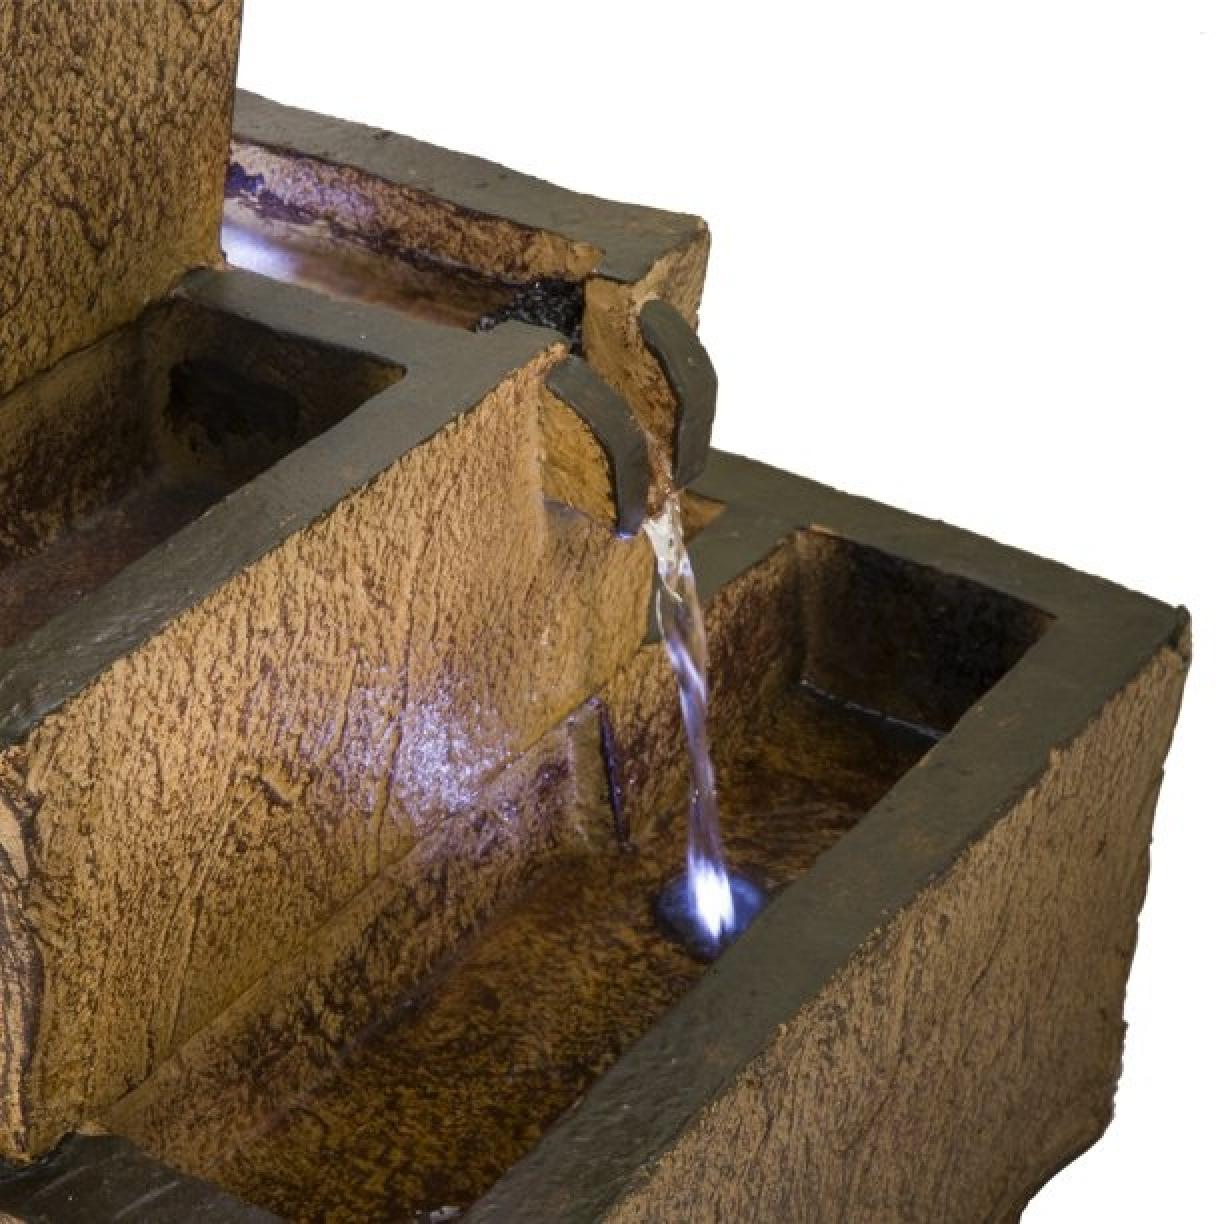 Alpine Rustic Tiered Fountain With LED Lights